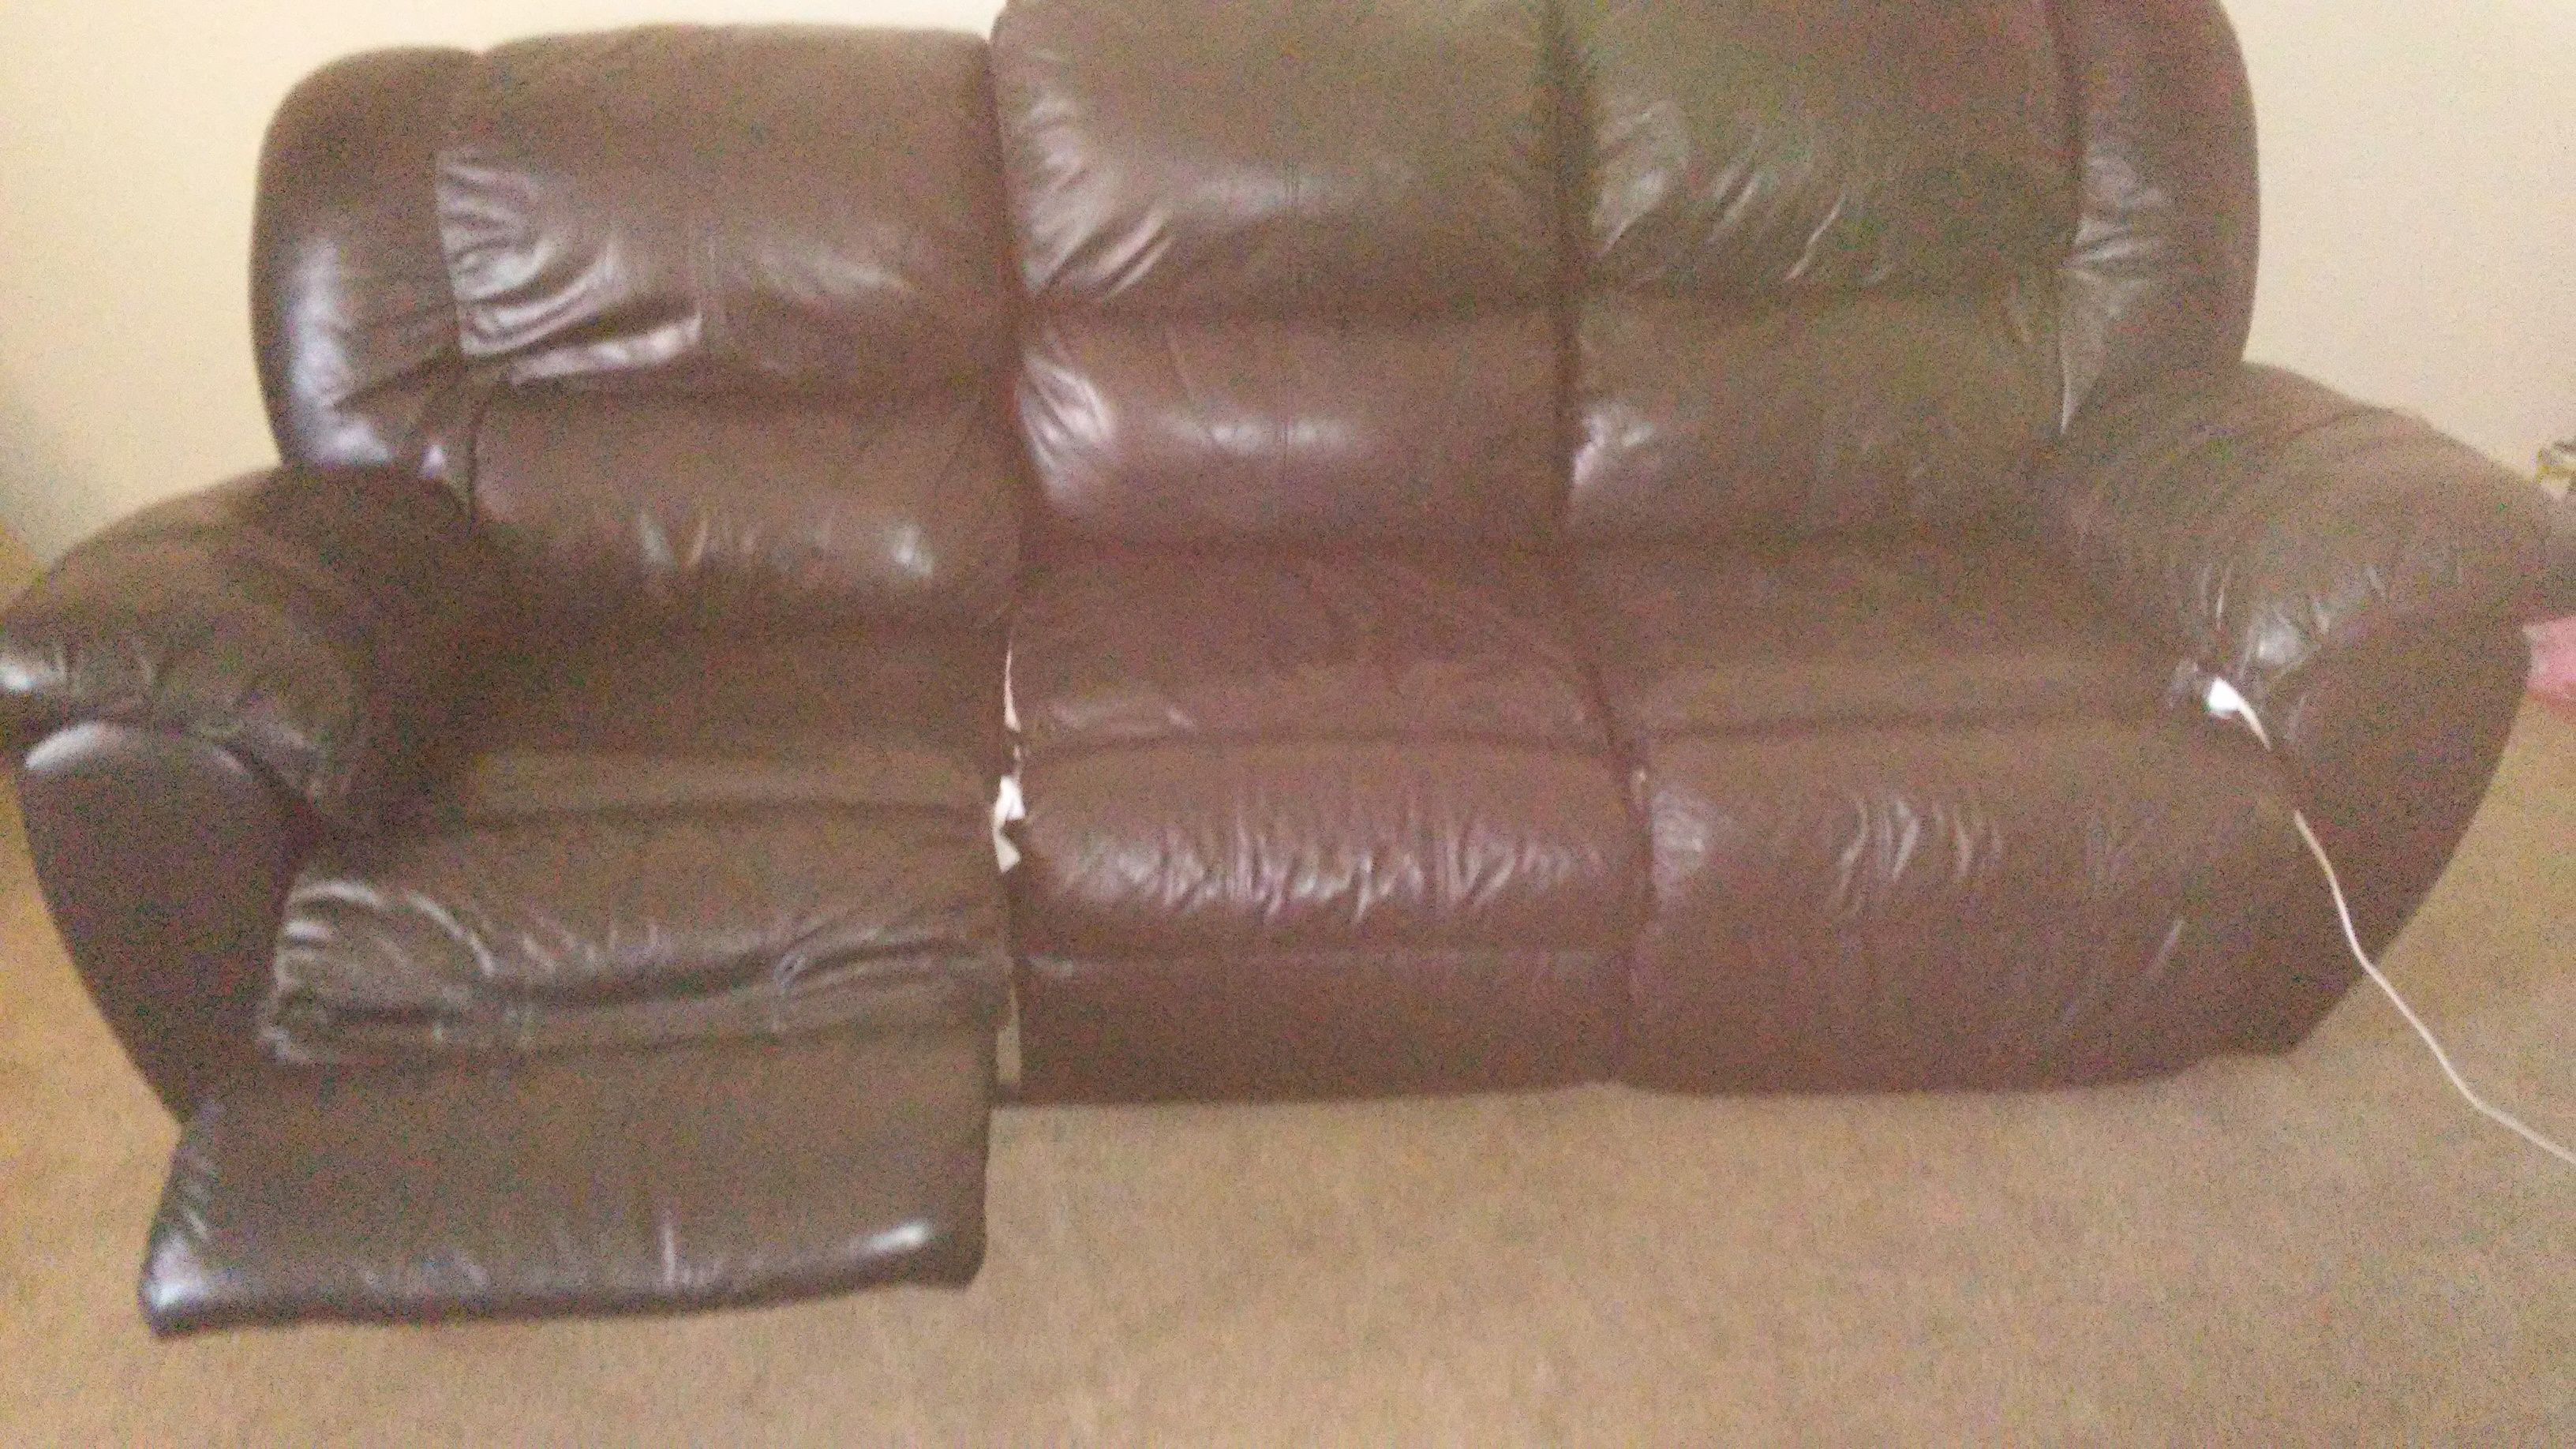 Used black leather couch, new with tag fishing pole, used tackle box and 32 inch tv